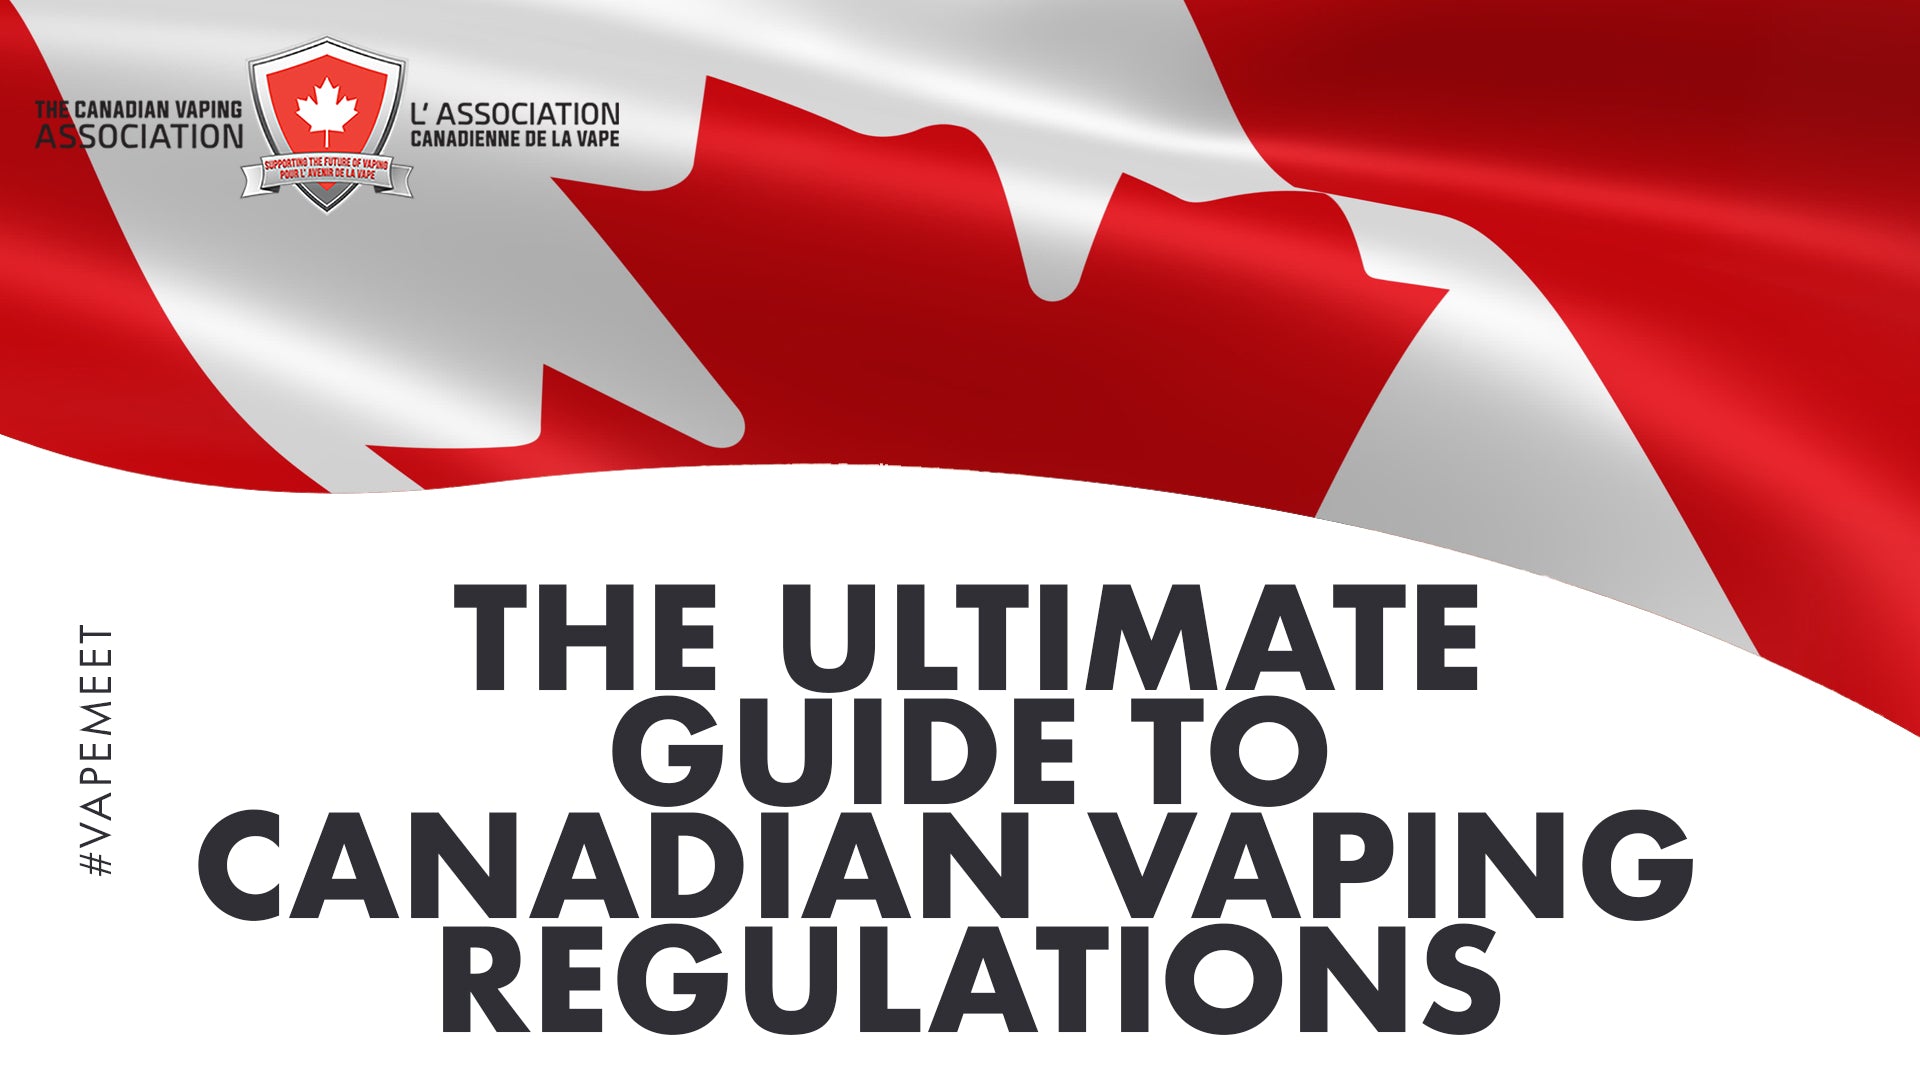 The Ultimate Guide to Canadian Vaping Regulations